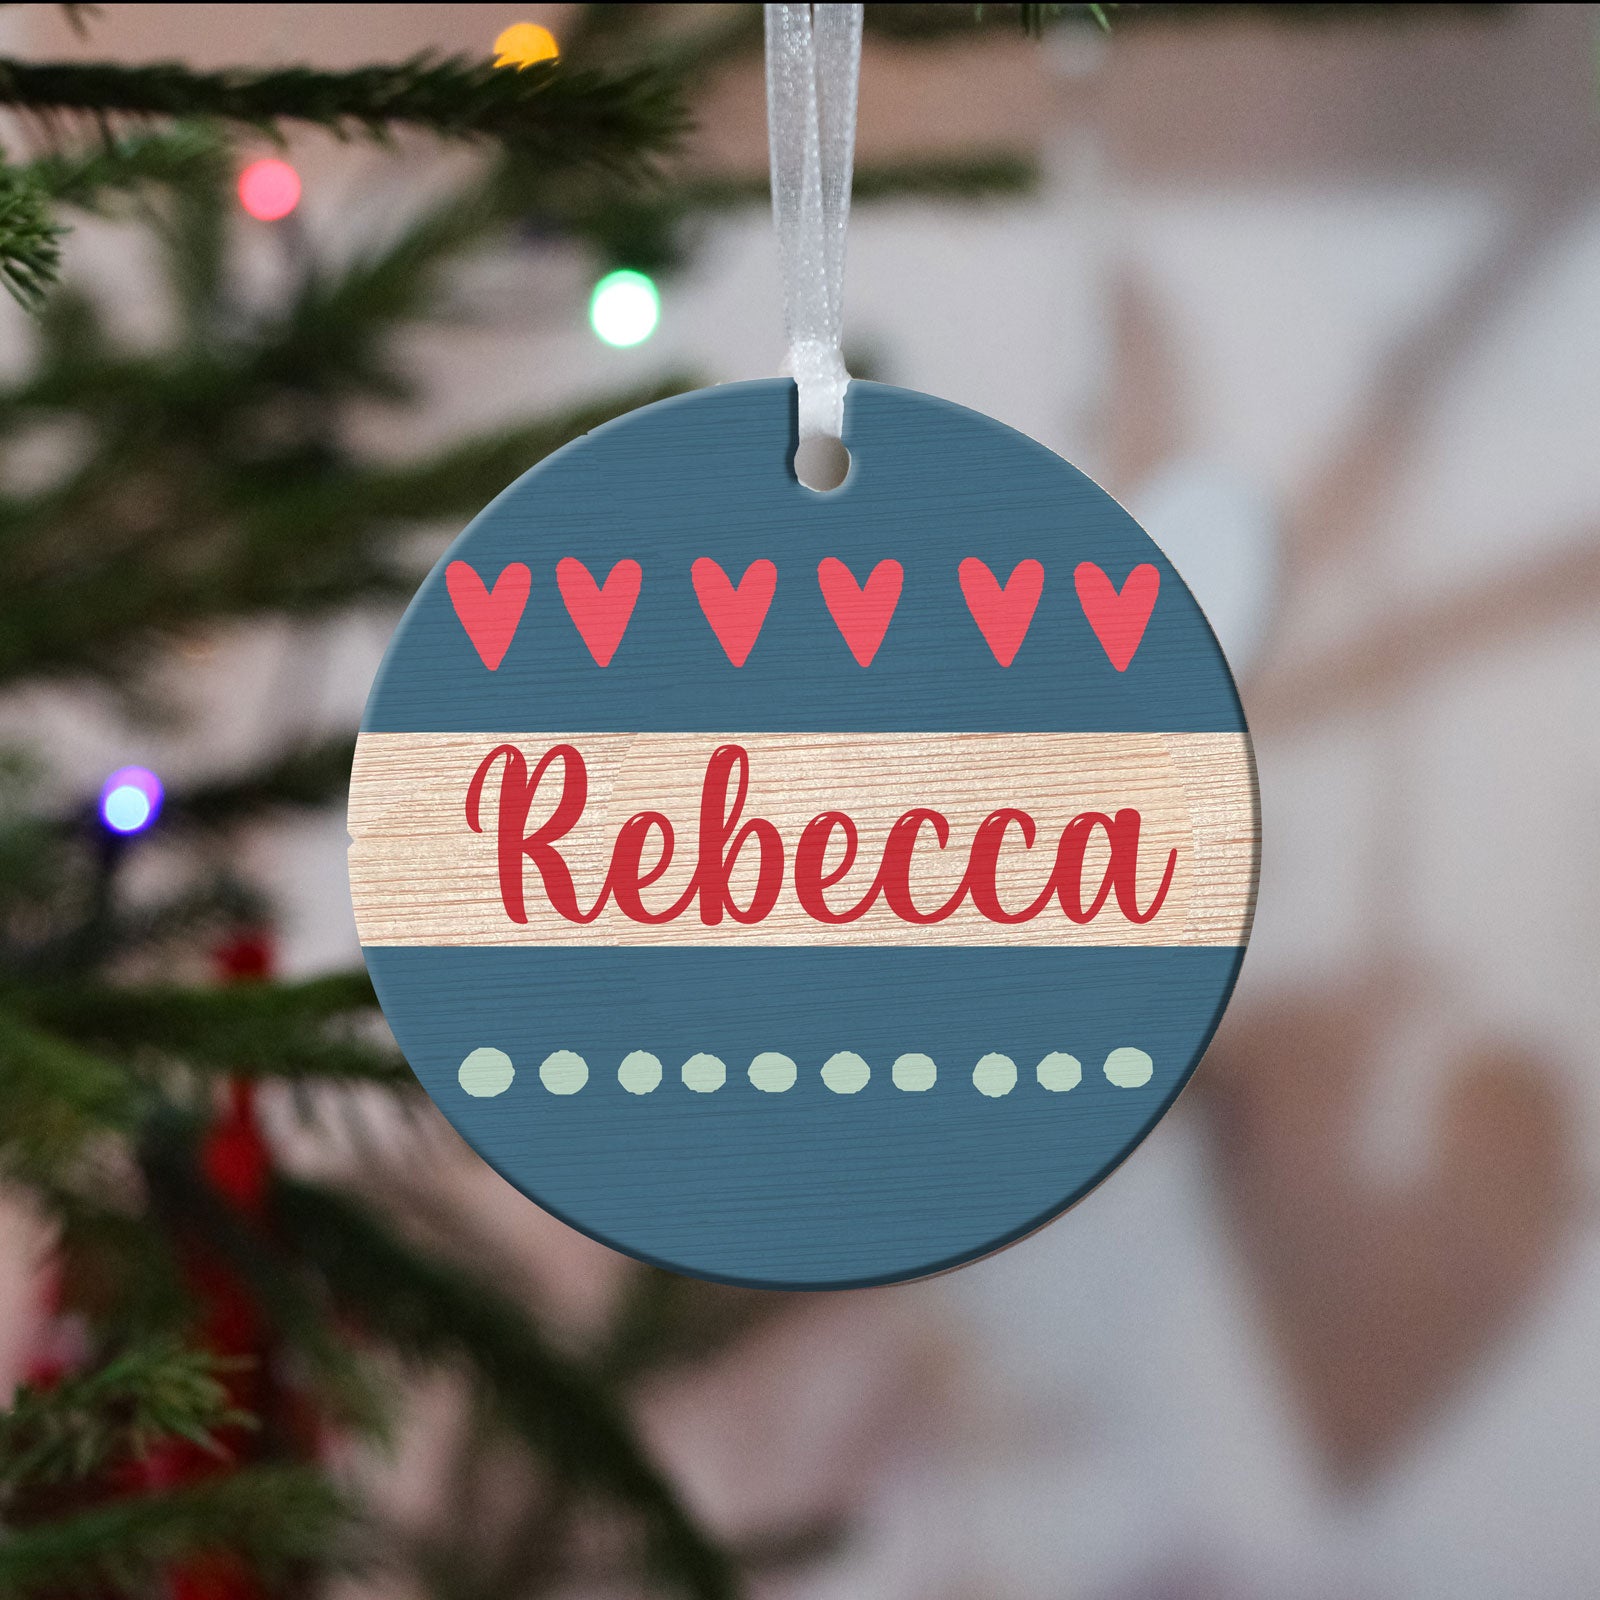 Personalised Wooden Christmas Ornaments Printed- Handcrafted Decoration Baubles, Ideal for Festive Season, Perfect Gift Option